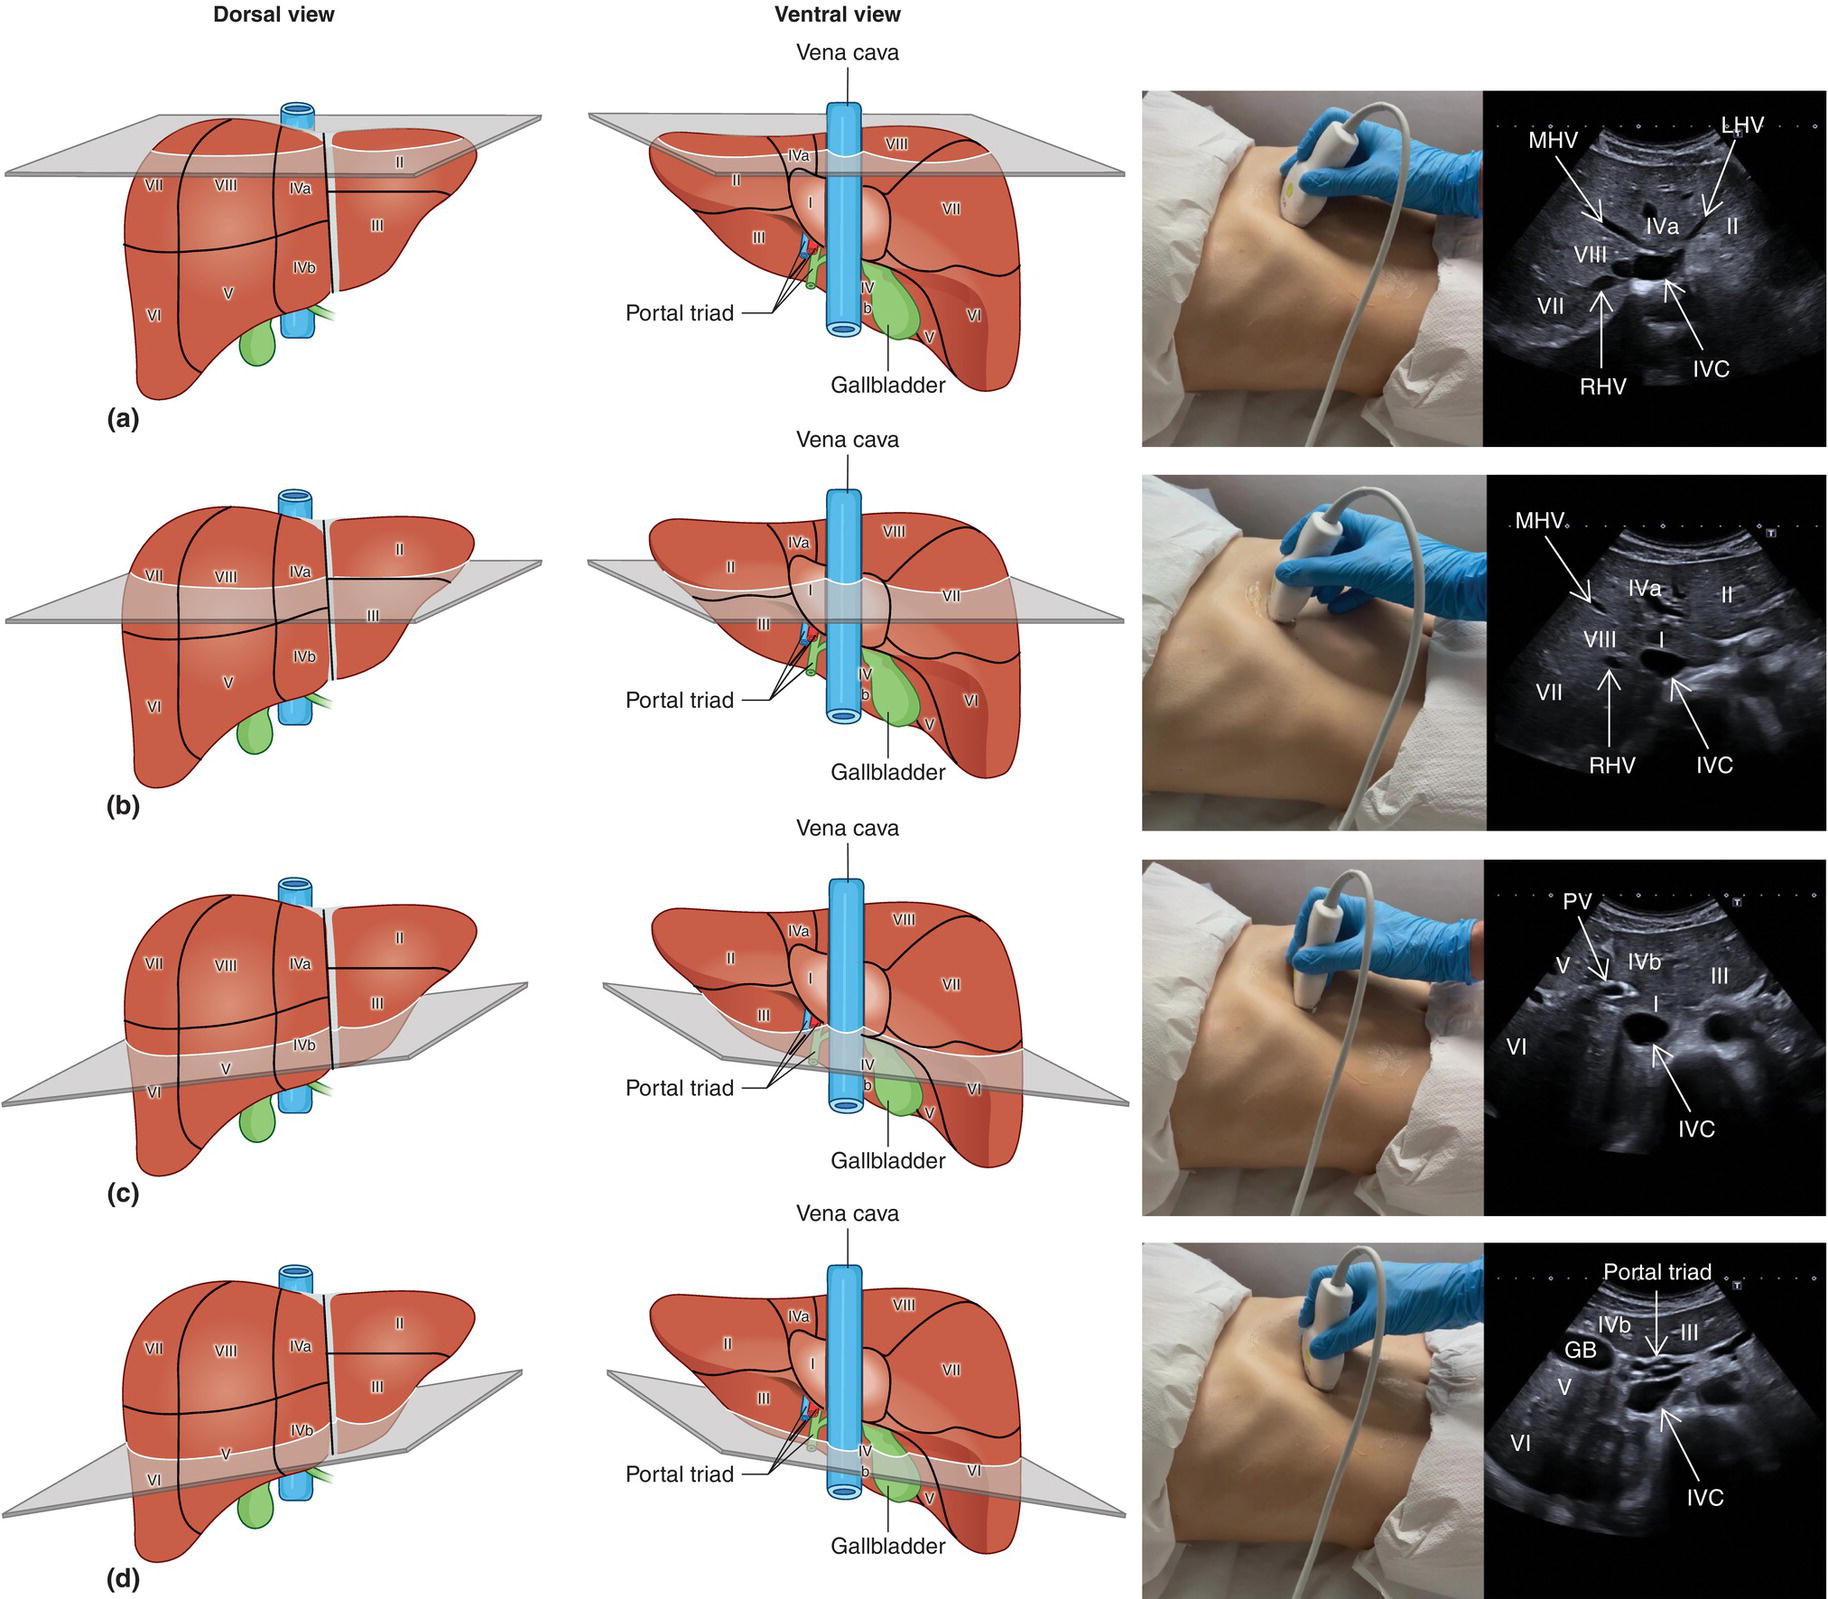 A diagram of liver segmentation. The labeled parts are as follows. I V C, middle, right, left hepatic vein, portal vein, hepatic artery, bile duct, gall bladder, and I V C.